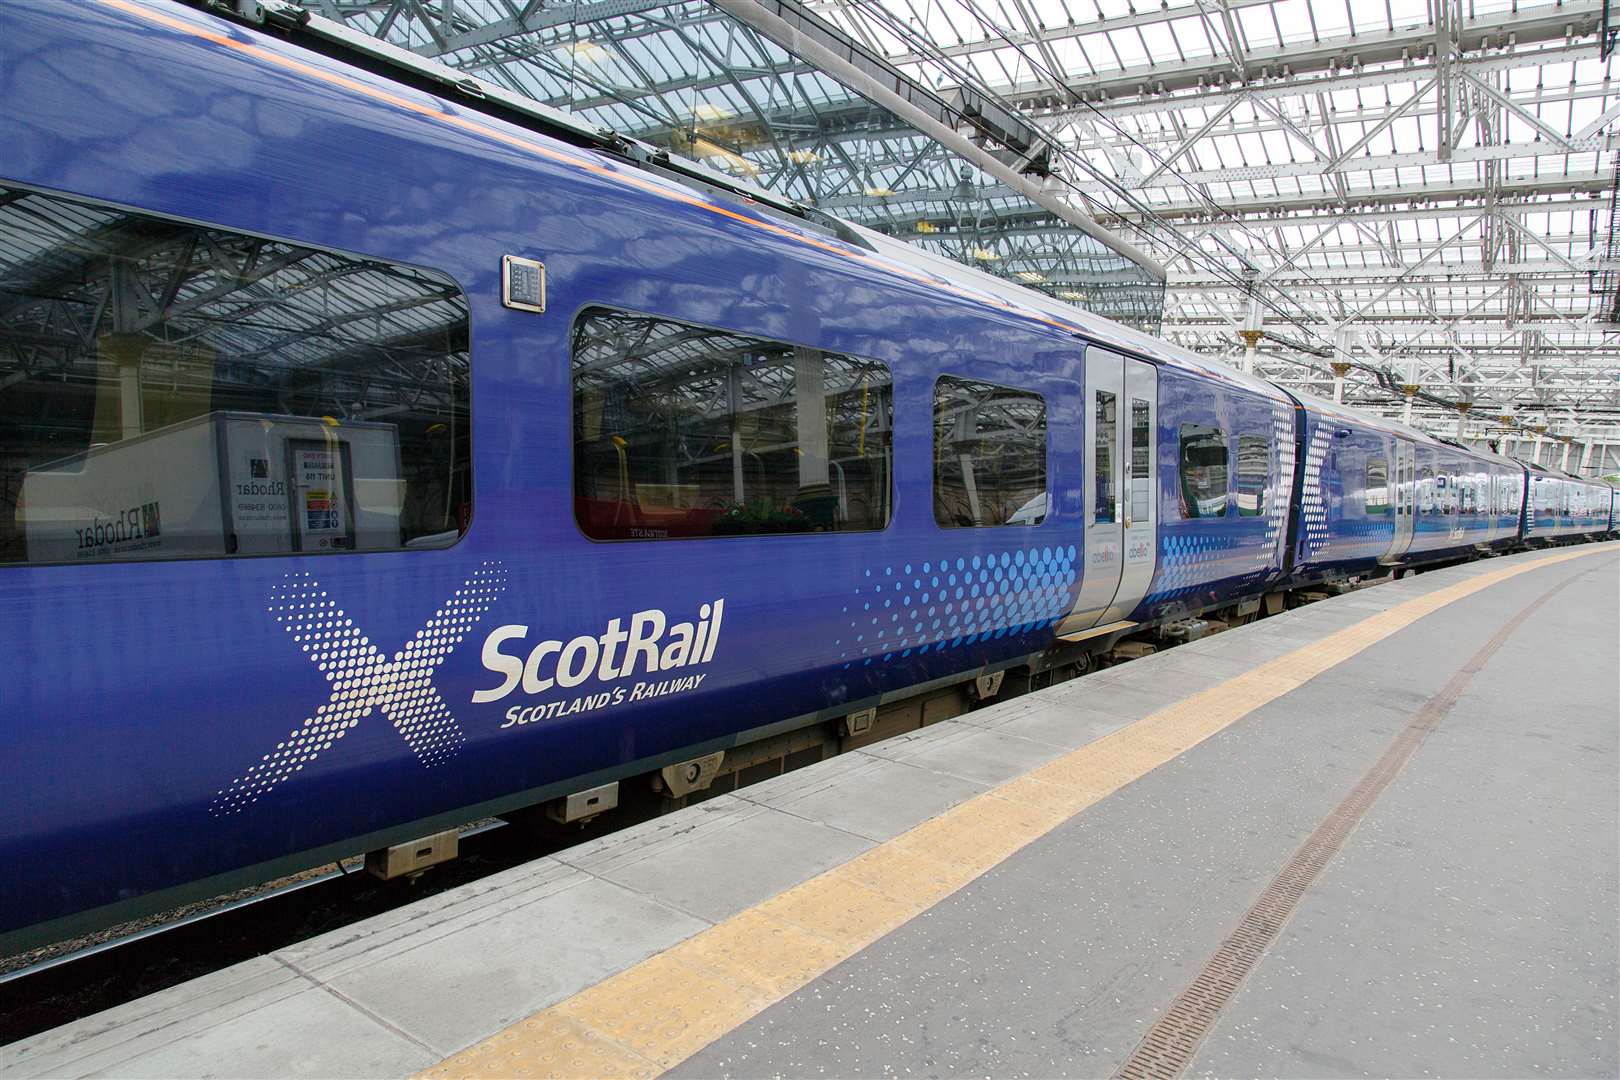 Train services across Scotland remain suspended until rail lines have been inspected.